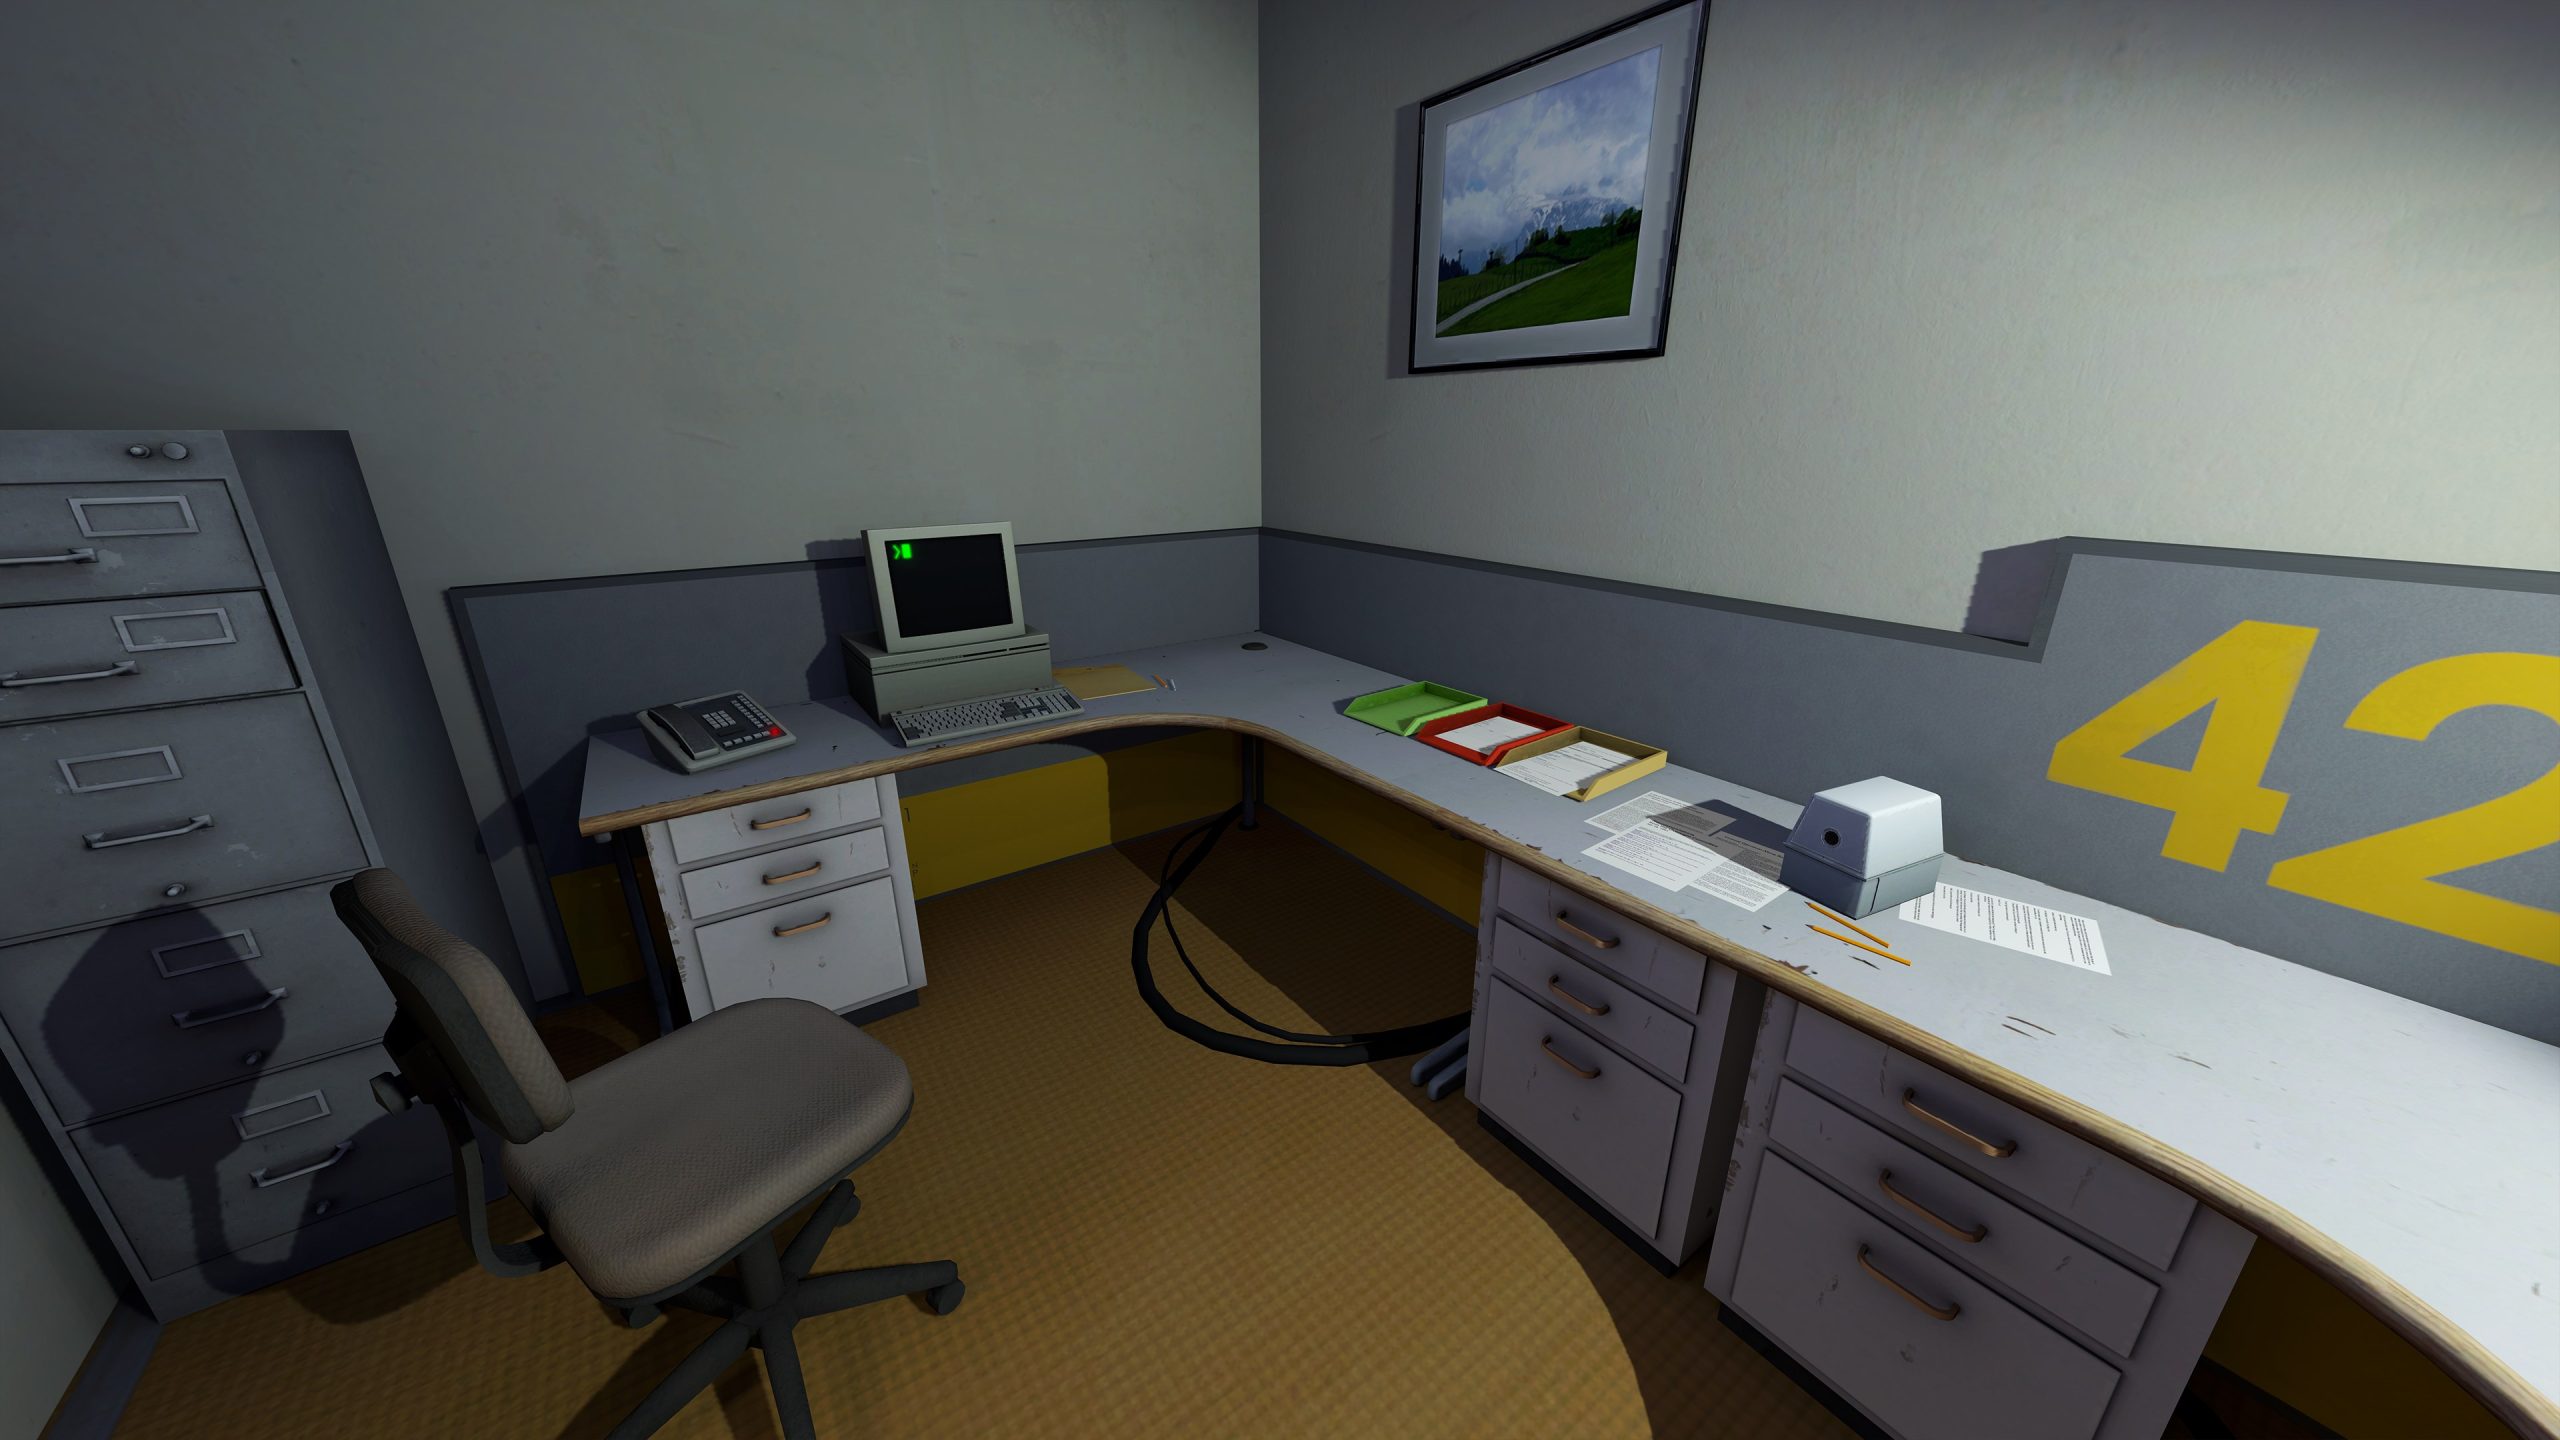 The Stanley Parable: Ultra Deluxe Editions op Xbox, PlayStation, Switch en pc